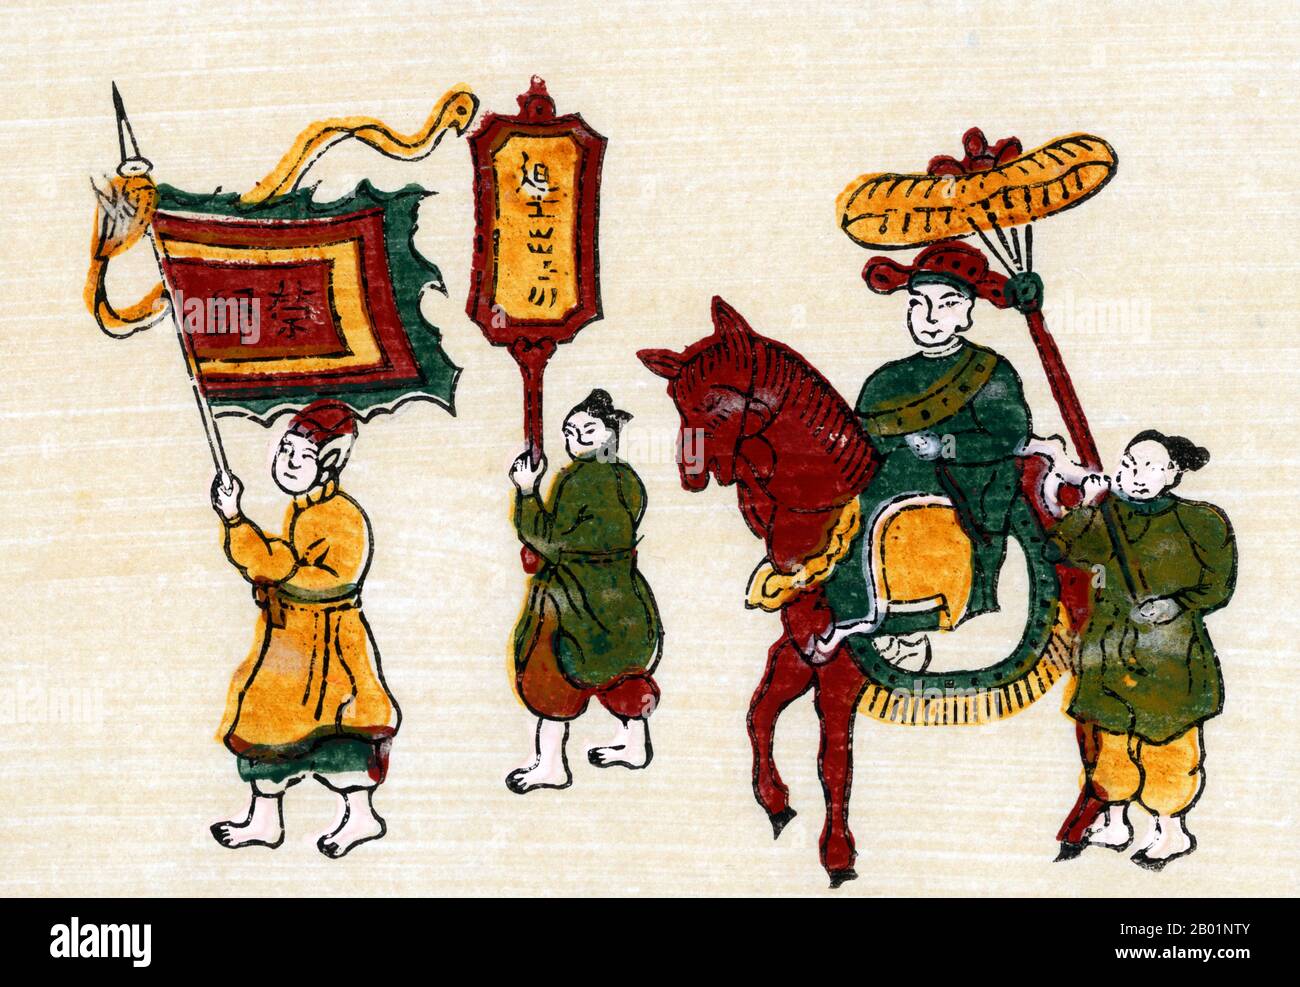 Vietnam: Mandarin and attendants on the road. Traditional woodblock painting from Dong Ho village, Bac Ninh Province, 20th century.  Dong Ho painting (Vietnamese: Tranh Đông Hồ or Tranh làng Hồ), full name Dong Ho folk woodcut painting (Tranh khắc gỗ dân gian Đông Hồ) is a genre of Vietnamese woodcut paintings originating from Dong Ho village (làng Đông Hồ) in Bac Ninh Province, Vietnam.  Using the traditional điệp paper and colours derived from nature, craftsmen print Dong Ho pictures of different themes from good luck wishes, historical figures to everyday activities and folk allegories. Stock Photo